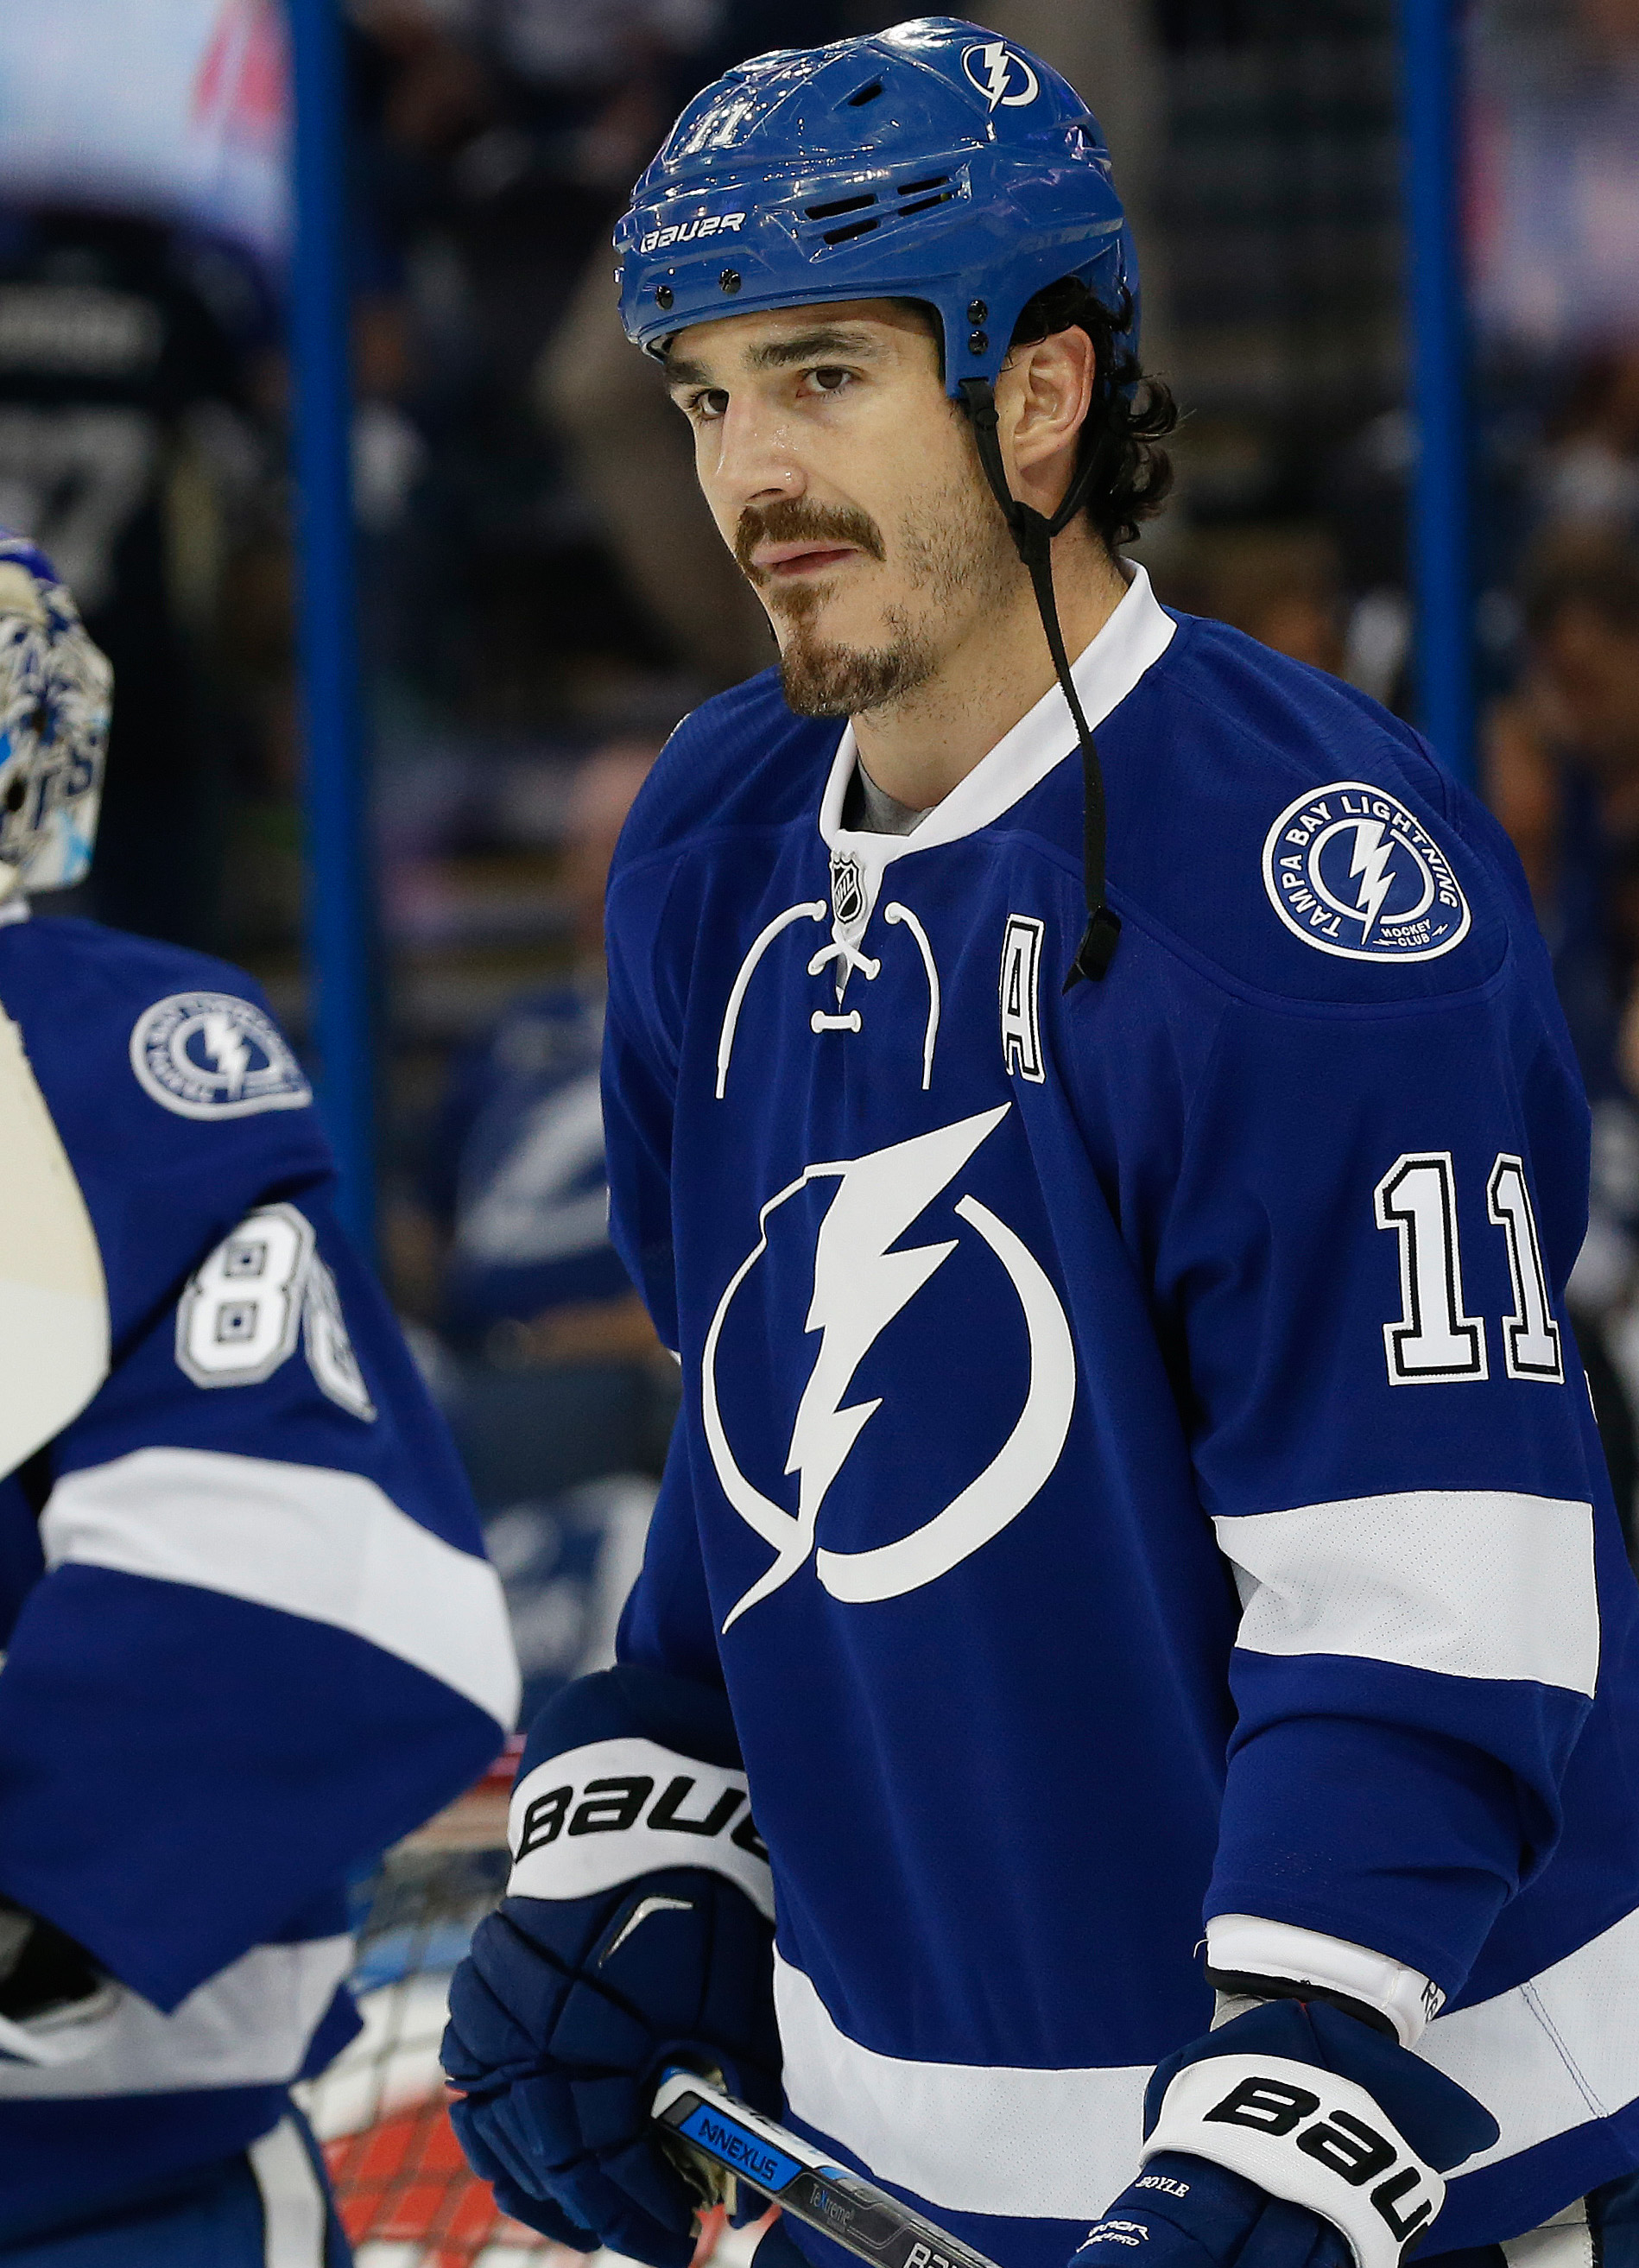 Former Lightning forward Brian Boyle looking for a new city